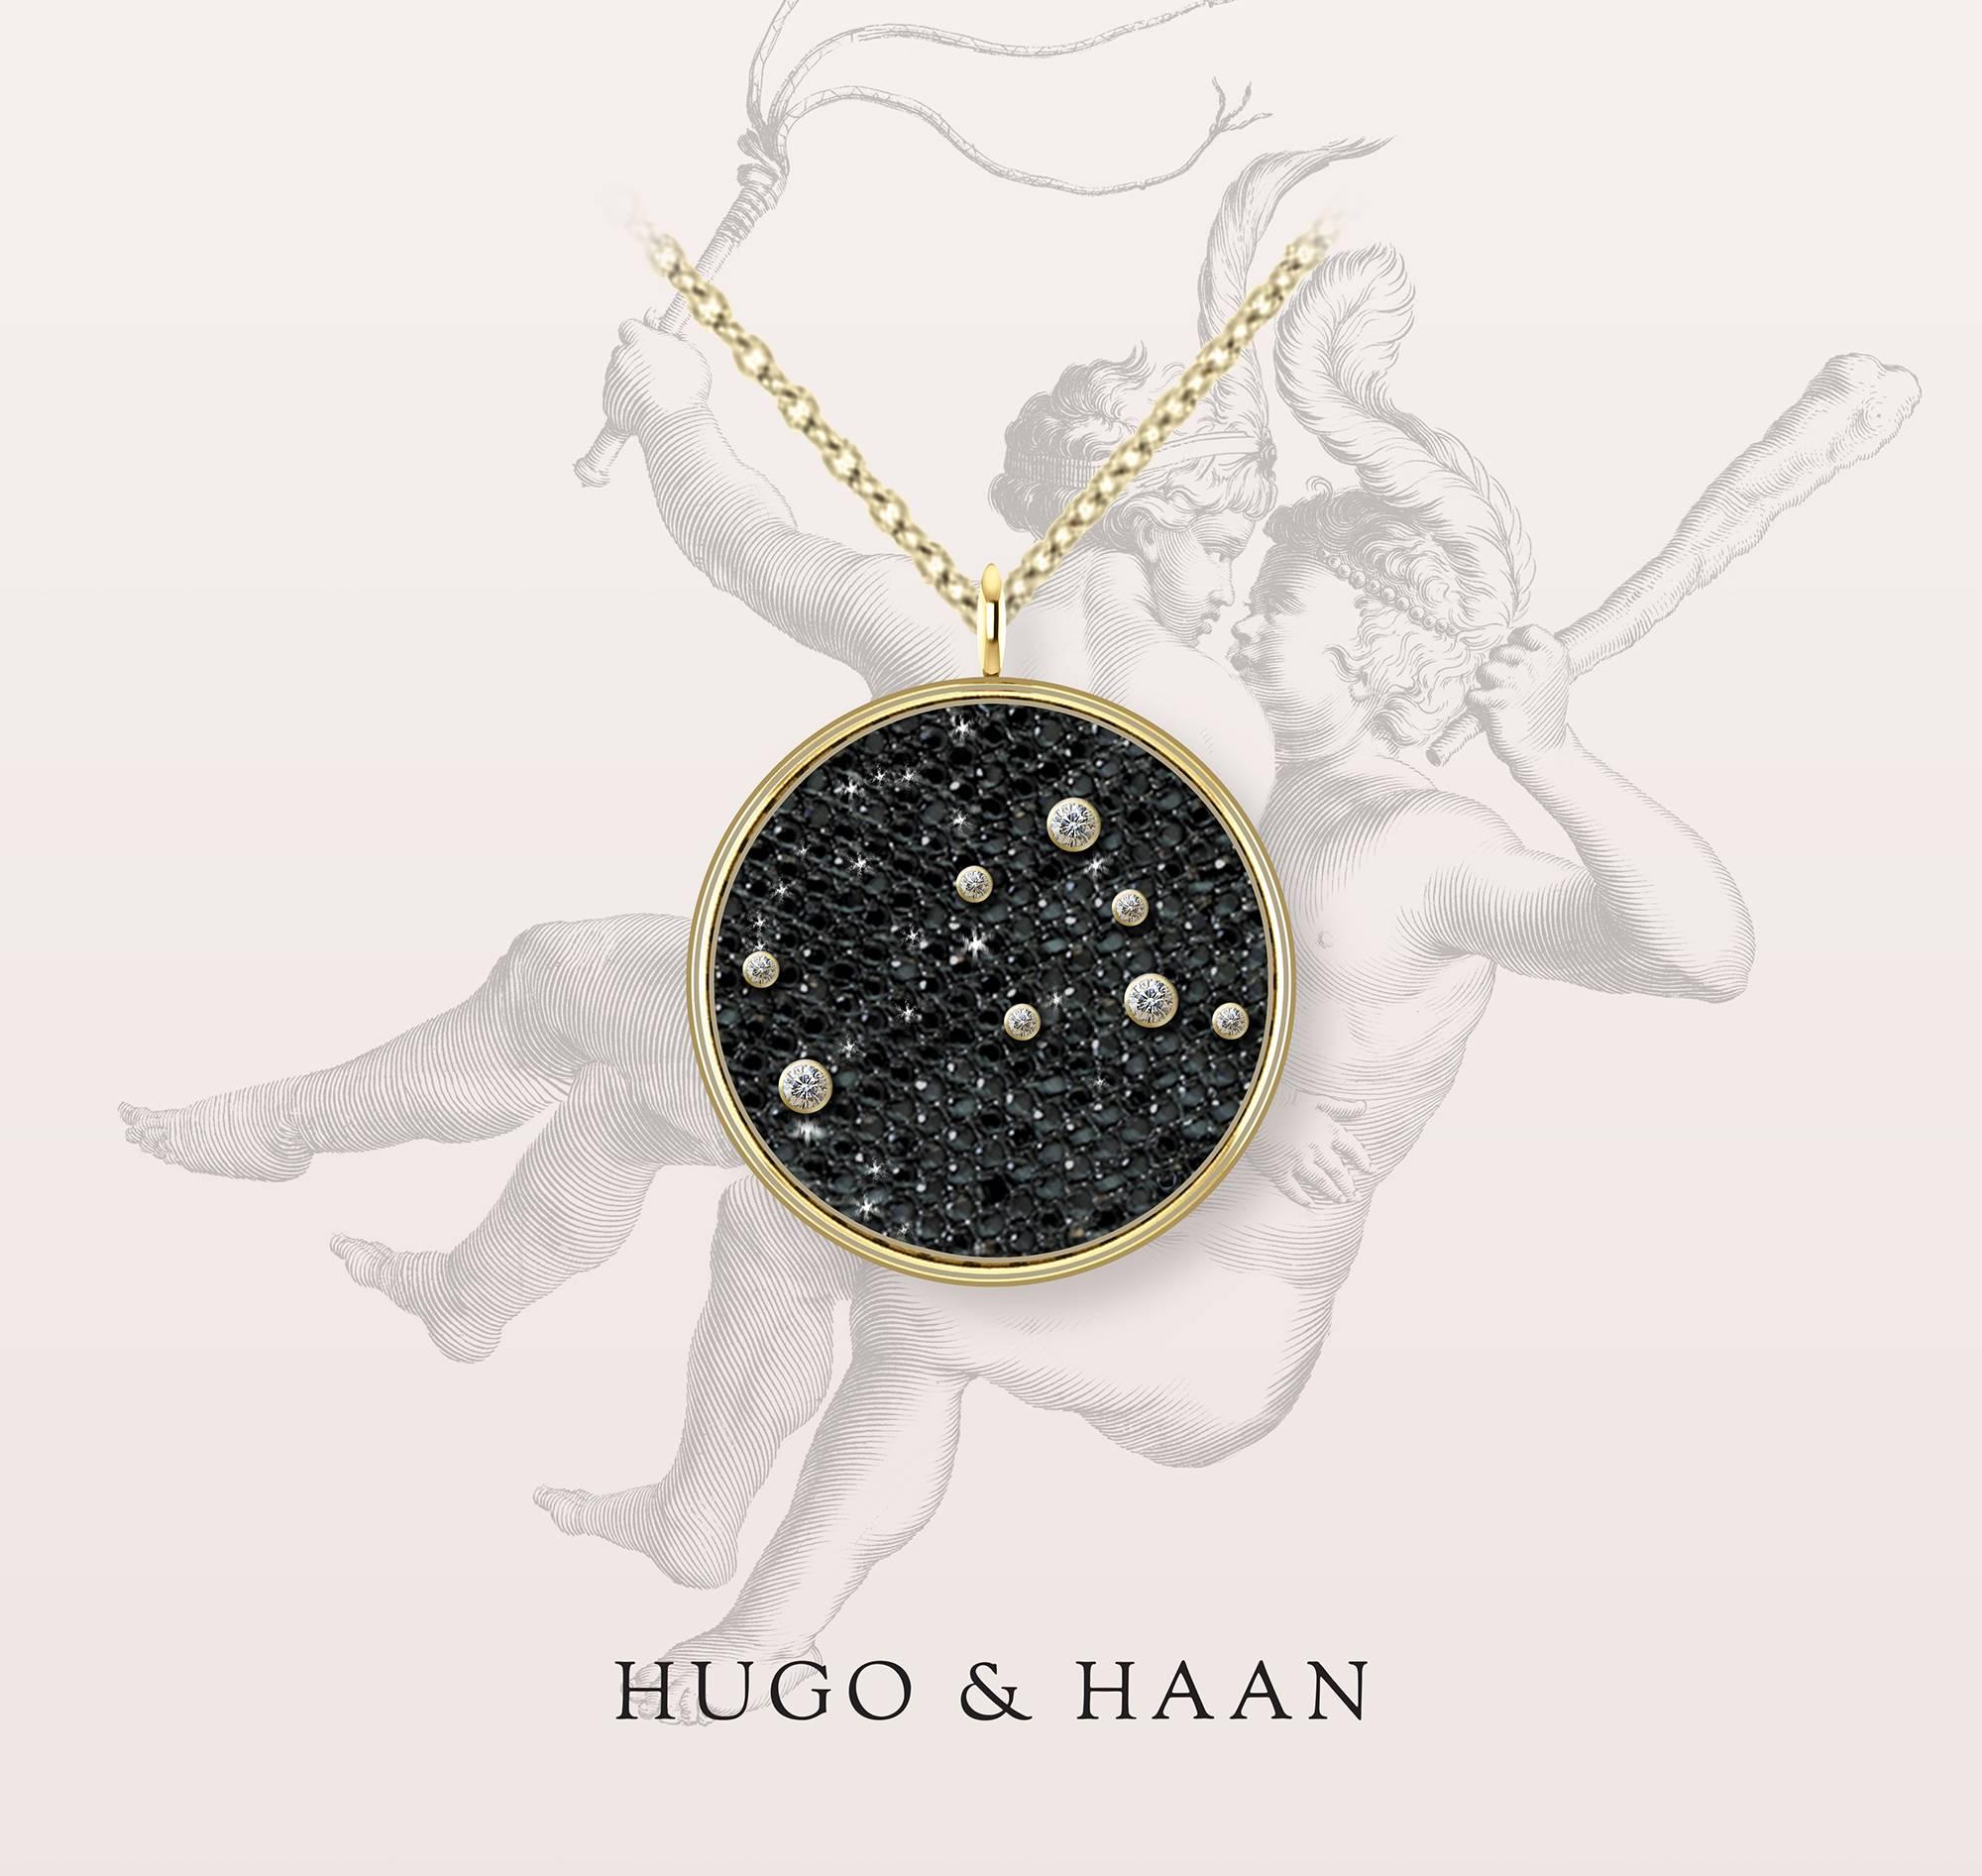 Details:

Material : 18k Yellow Gold
Principle Gemstone : Brilliant Cut White Diamonds
Other Gemstone : Black Diamond Pave
Customizable: Yes - we can create any star constellation

Options to customize: 

Metals available : Platinum /18kt Yellow